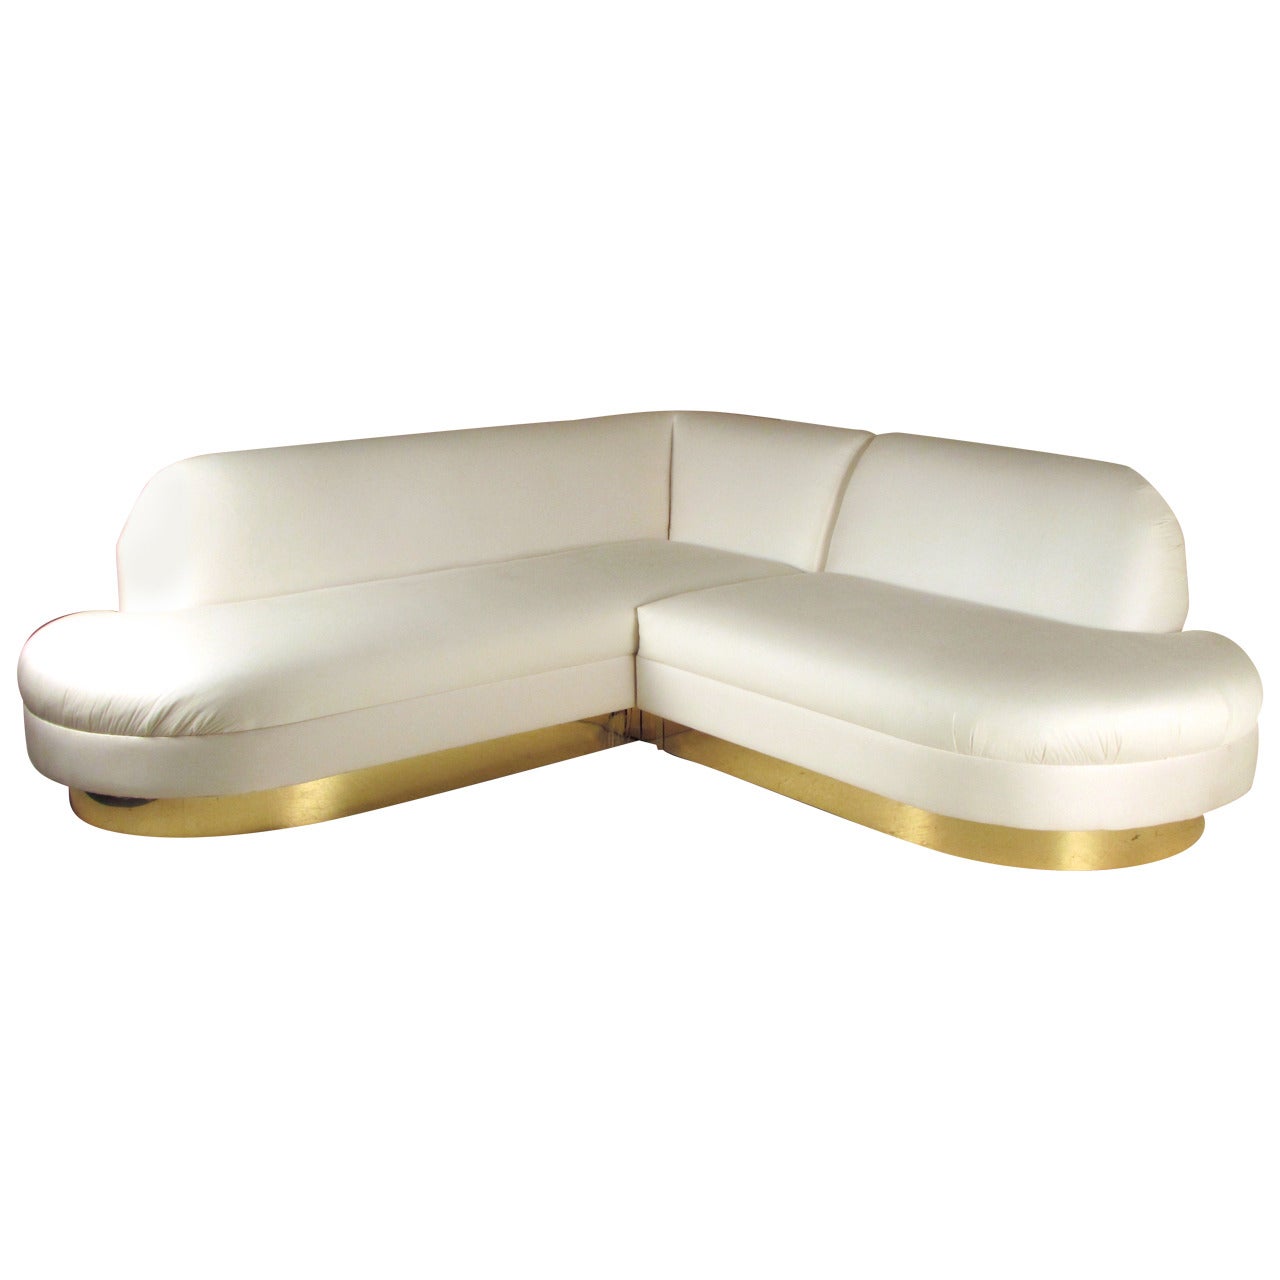 Rare, Glamorous Adrian Pearsall Sofa with Brass Base for Comfort Designs, Inc